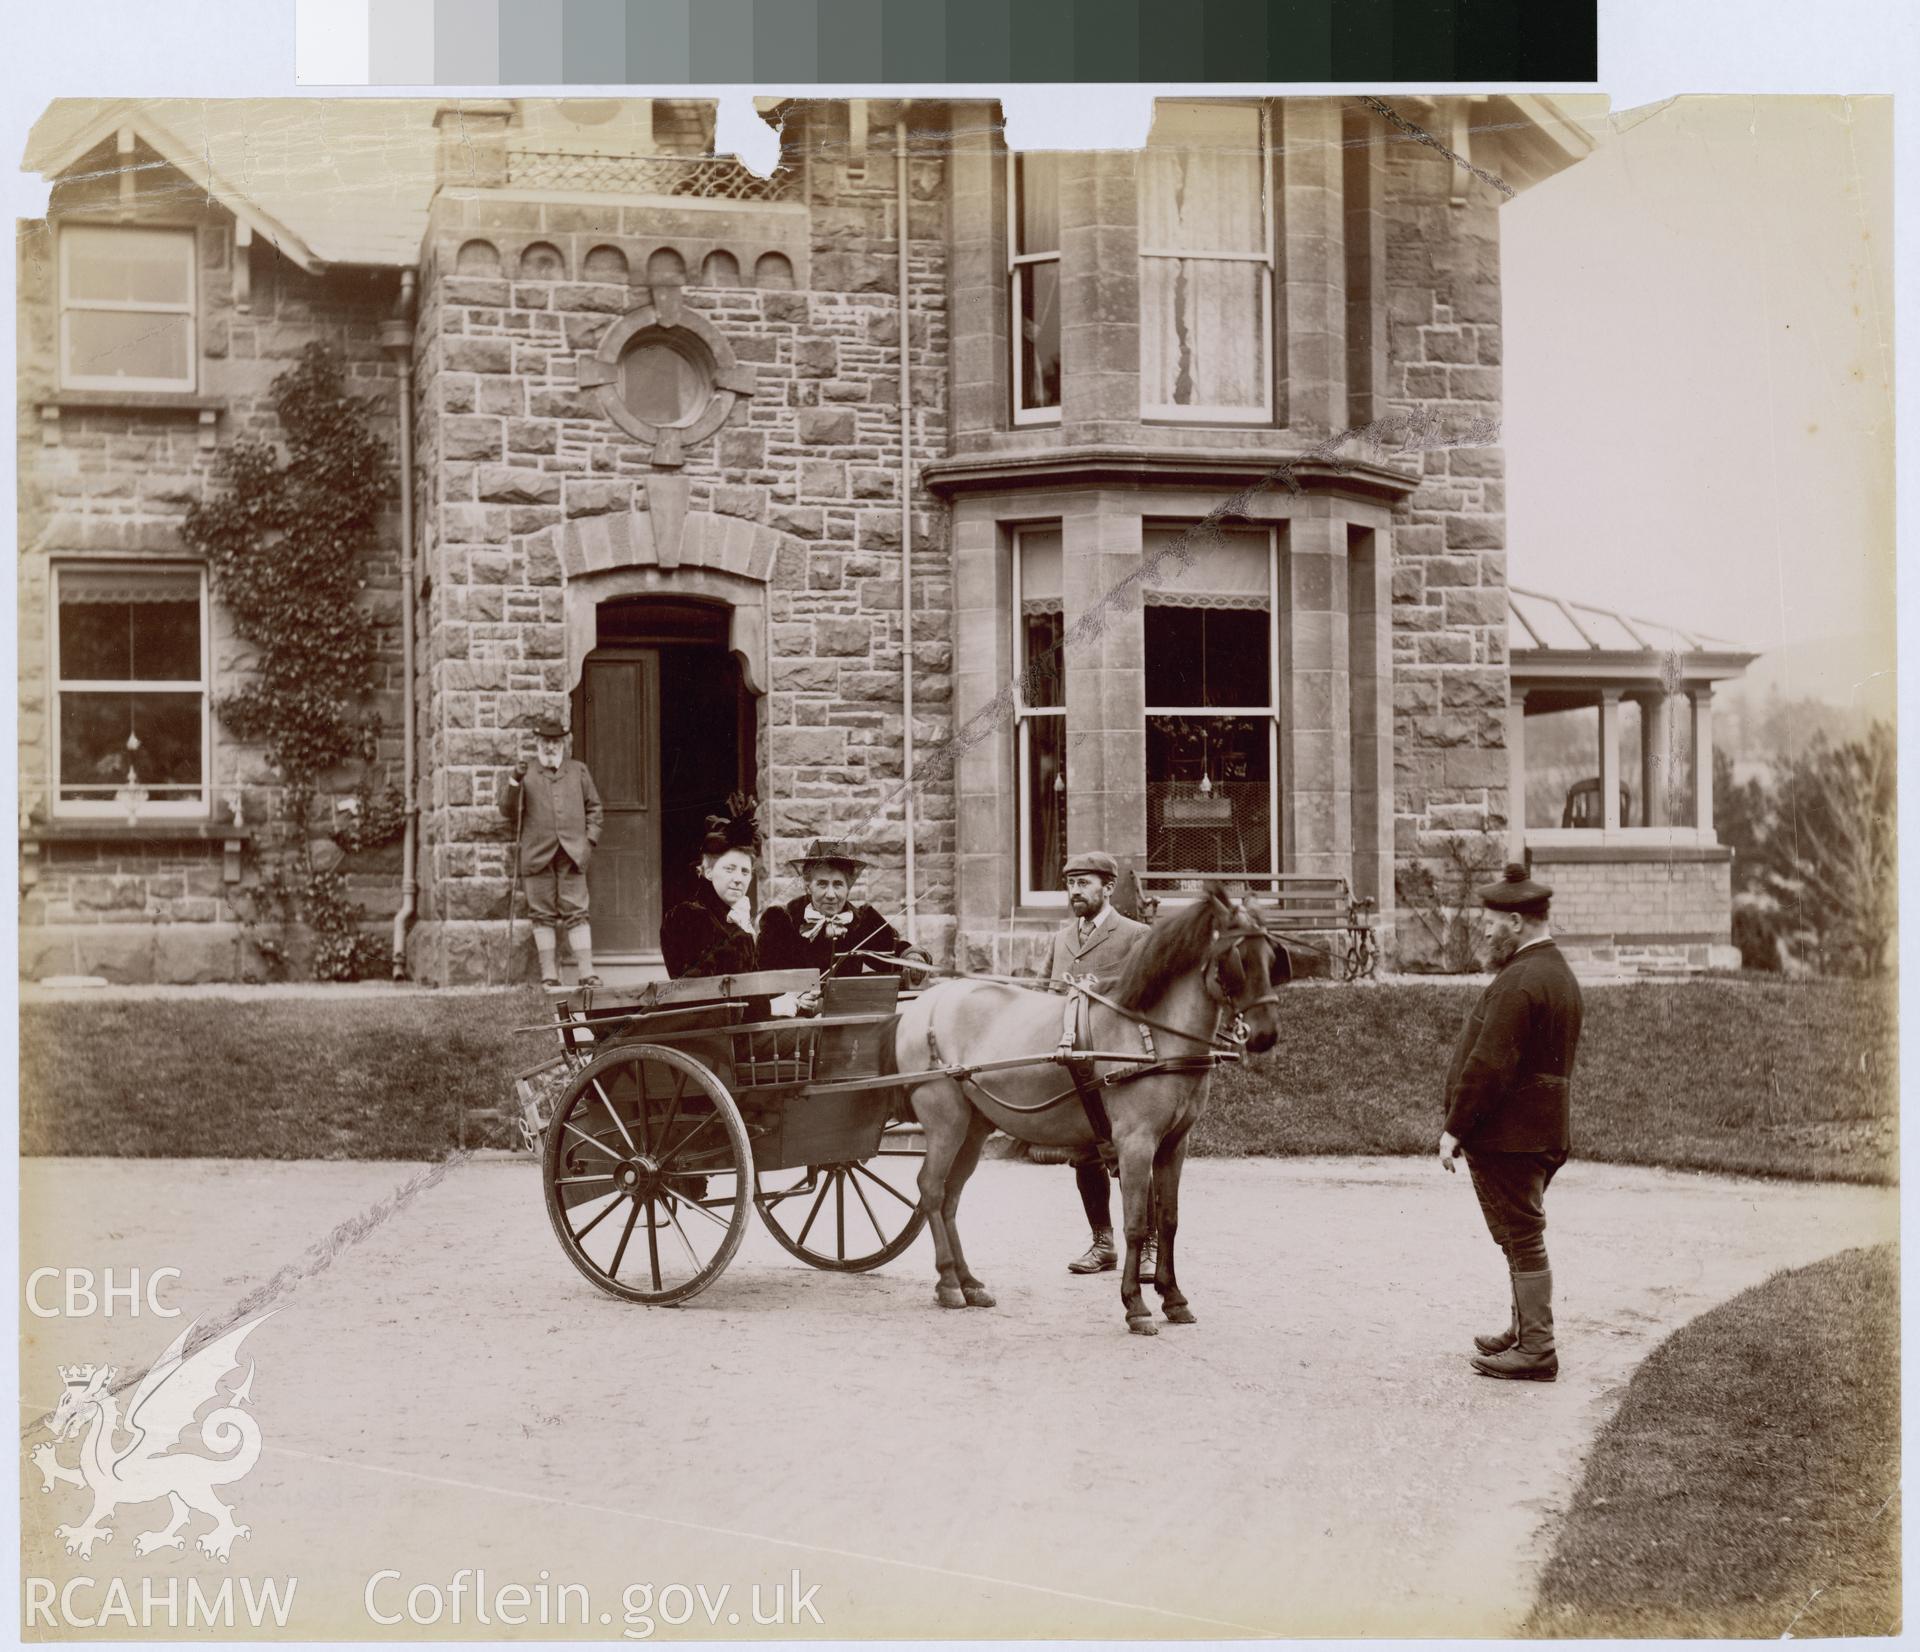 Digital copy of an albumen print from Edward Hubbard Collection showing pony and trap with passengers outside house.